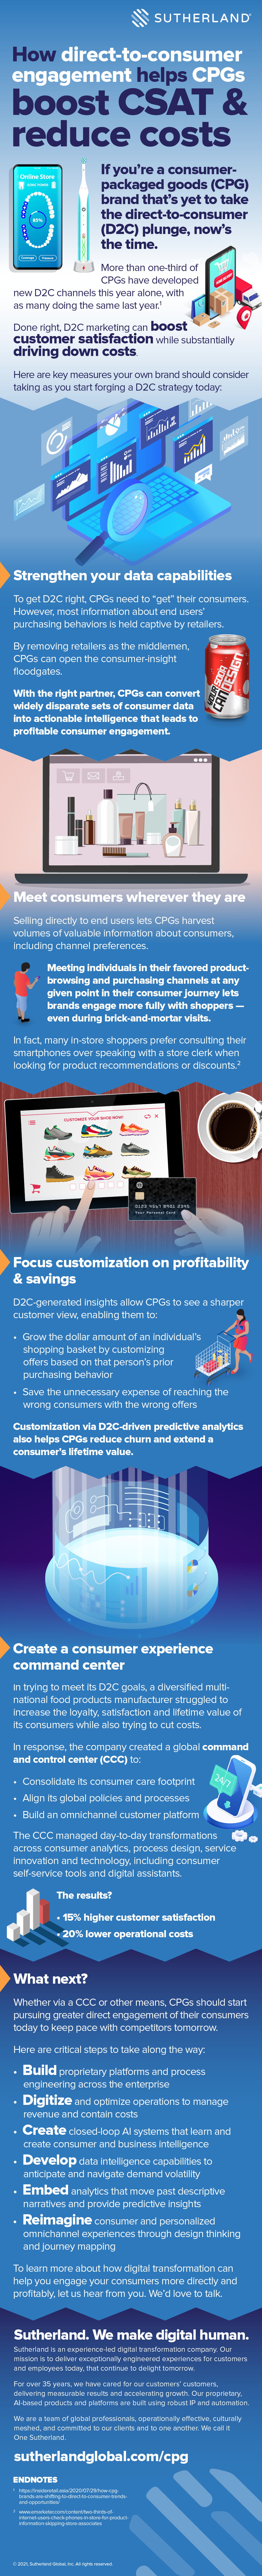 How direct-to-consumer engagement helps CPGs boost CSAT & reduce costs